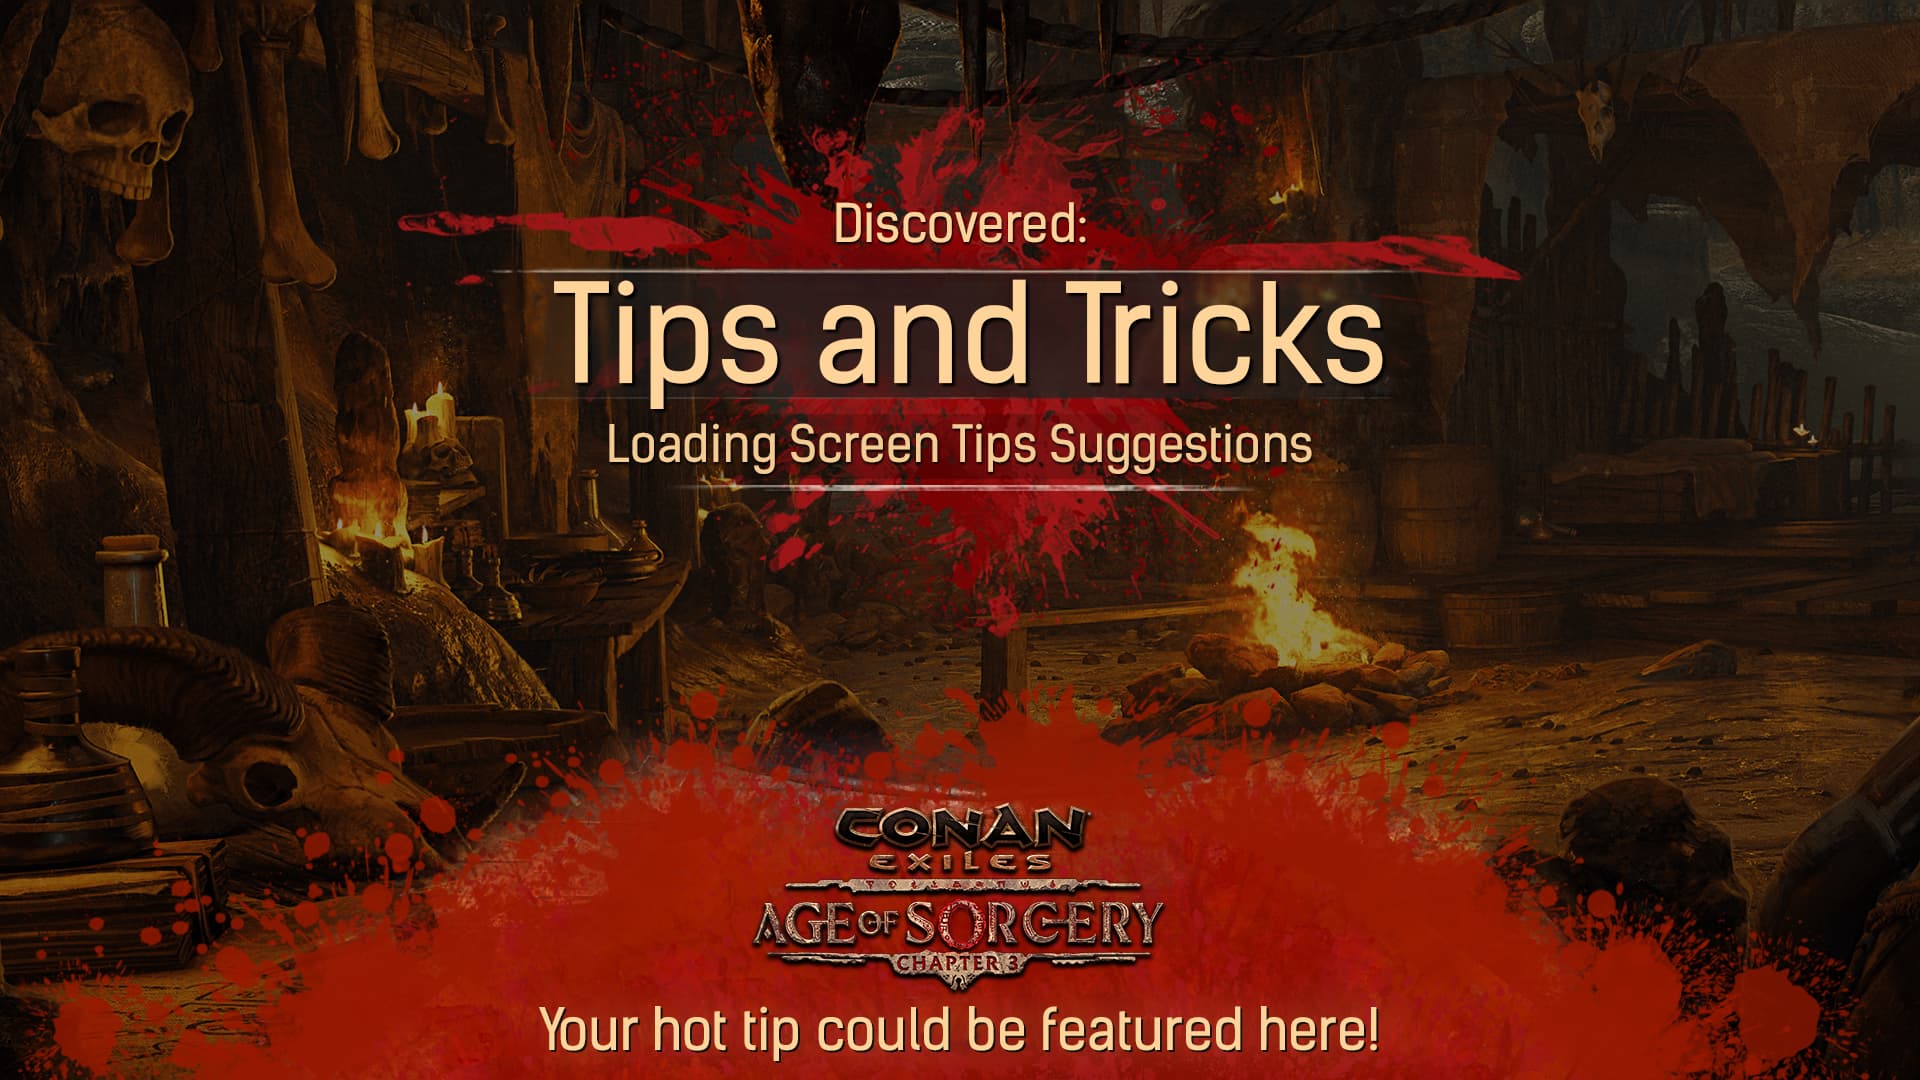 Cirkel Diktatur moden Conan Exiles on Twitter: "Submissions for this are still open! Make sure to  send us your Loading Screen Tips suggestions for a chance to have a  permanent place in the game 👀" /